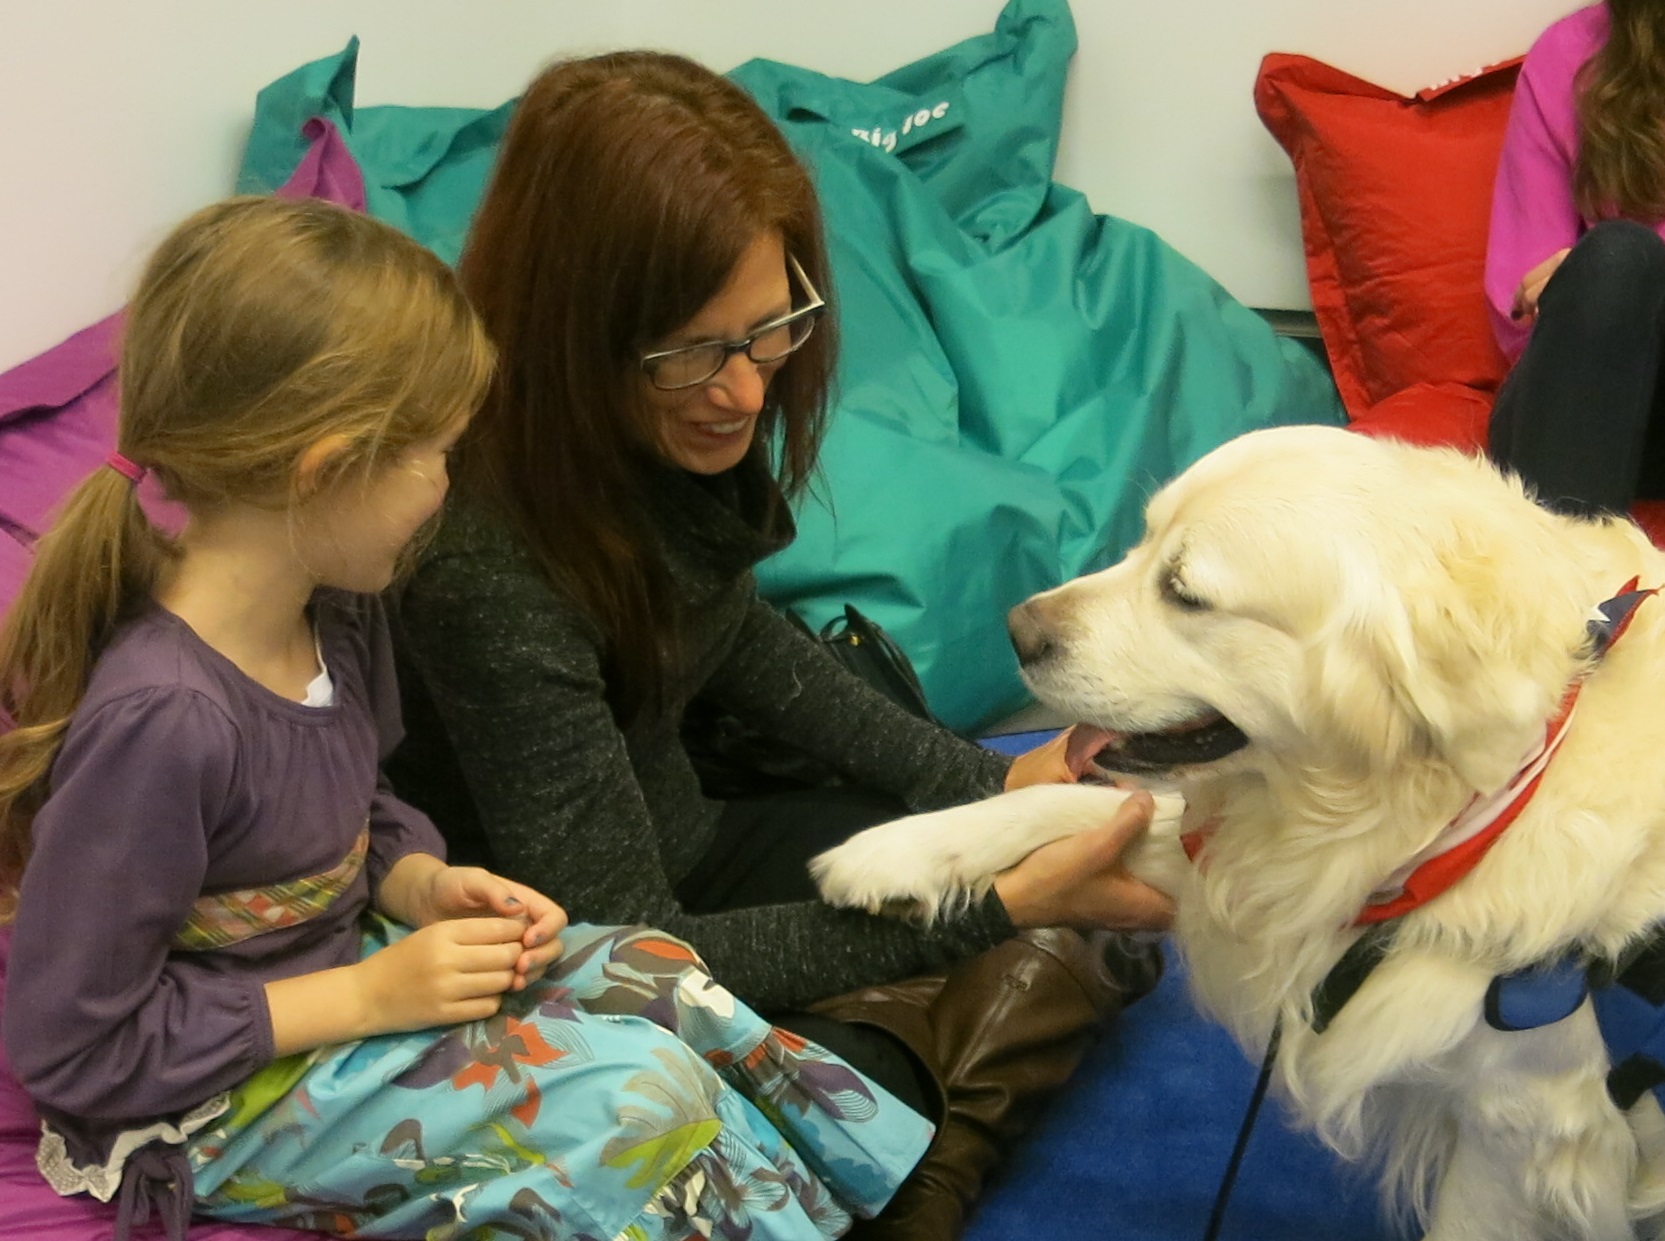 Chance, a trained disaster relief canine, interacts with a young girl and a woman in the Museum’s Education Center.